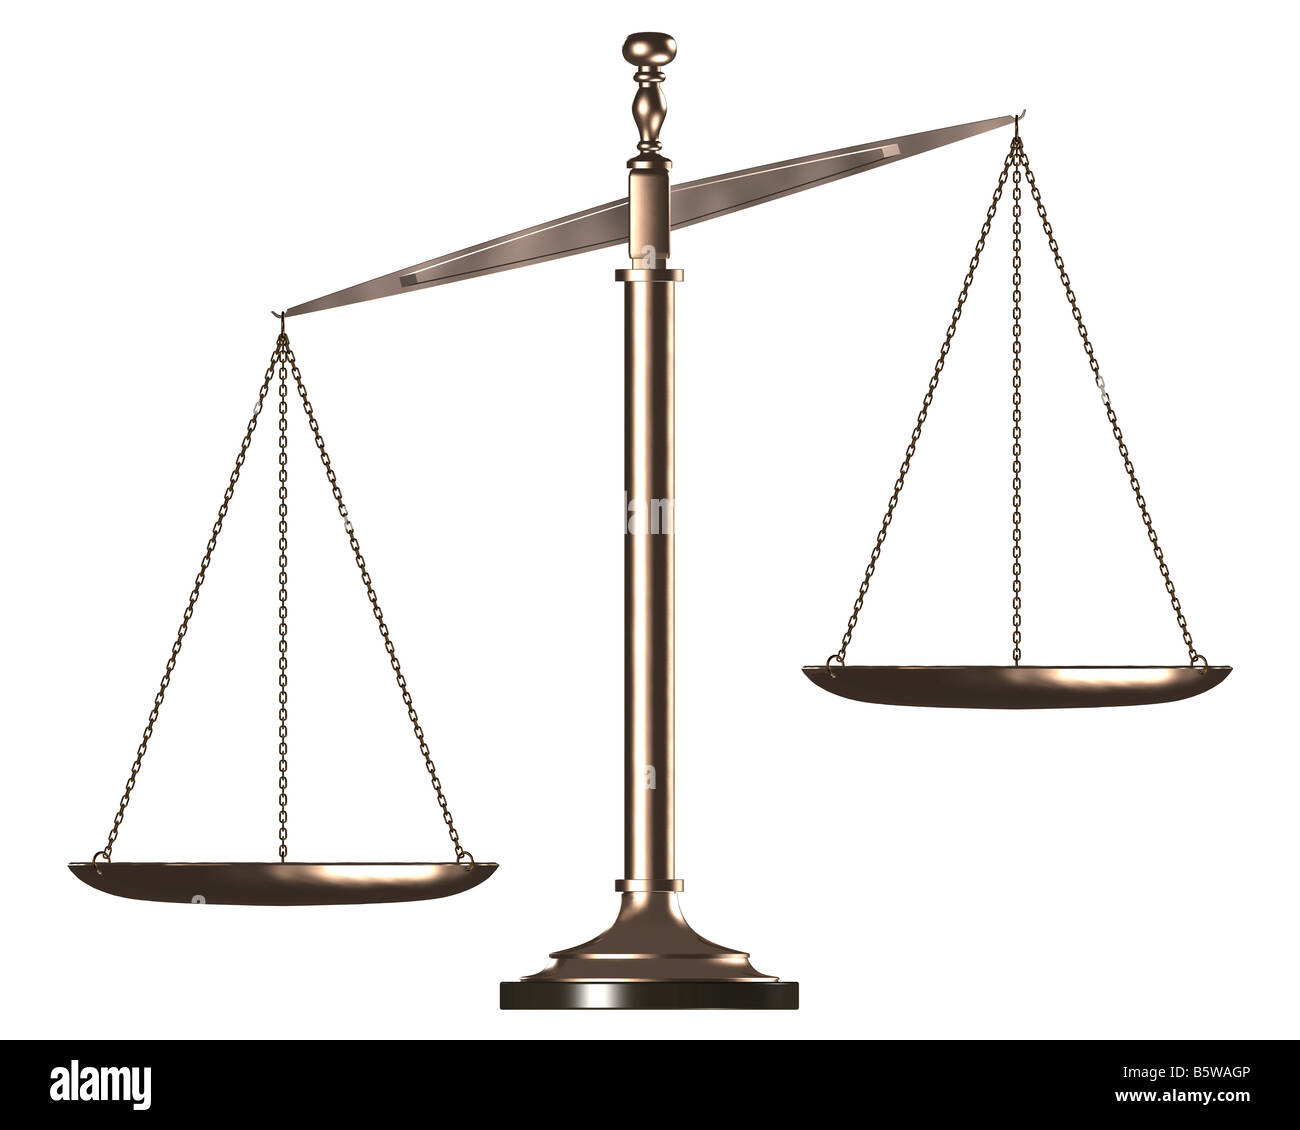 Biased weight scales Stock Photo